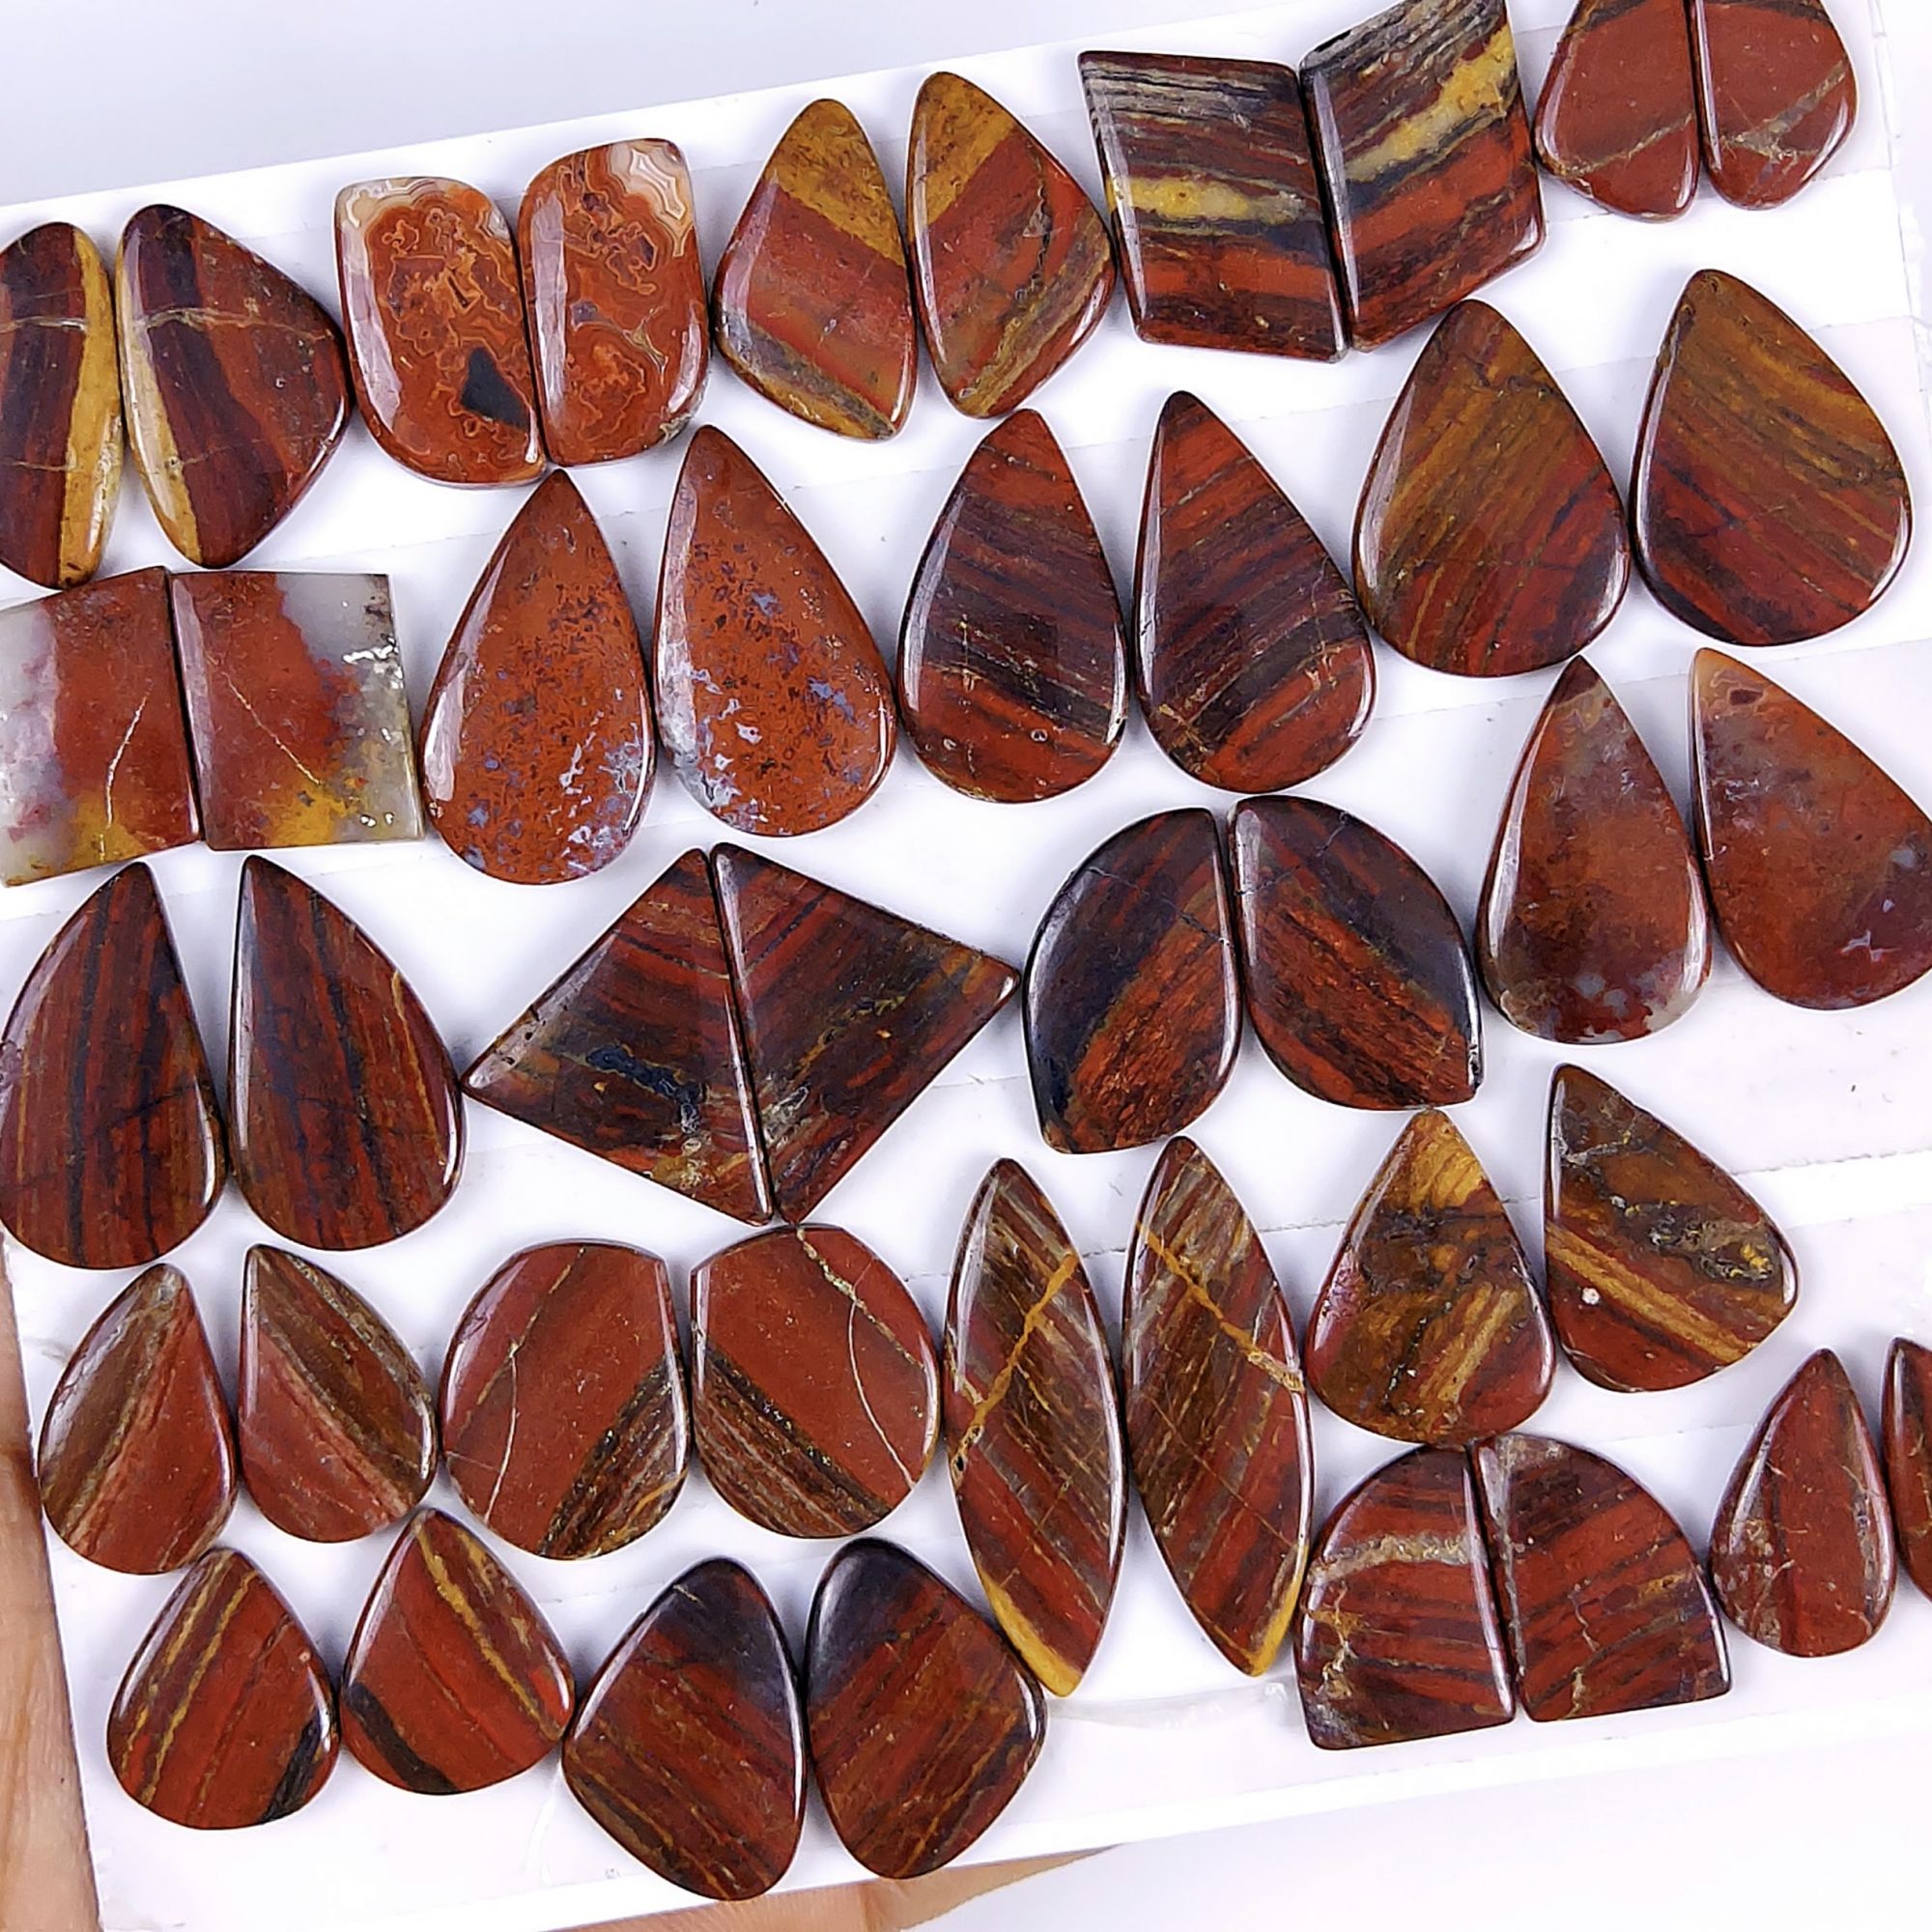 21Pair 380Cts Natural Iron Tiger Eye Gemstone Smooth Cabochon Pair Loose Gemstone For Jewelry Making Lot 34x11 17x14mm#G-353